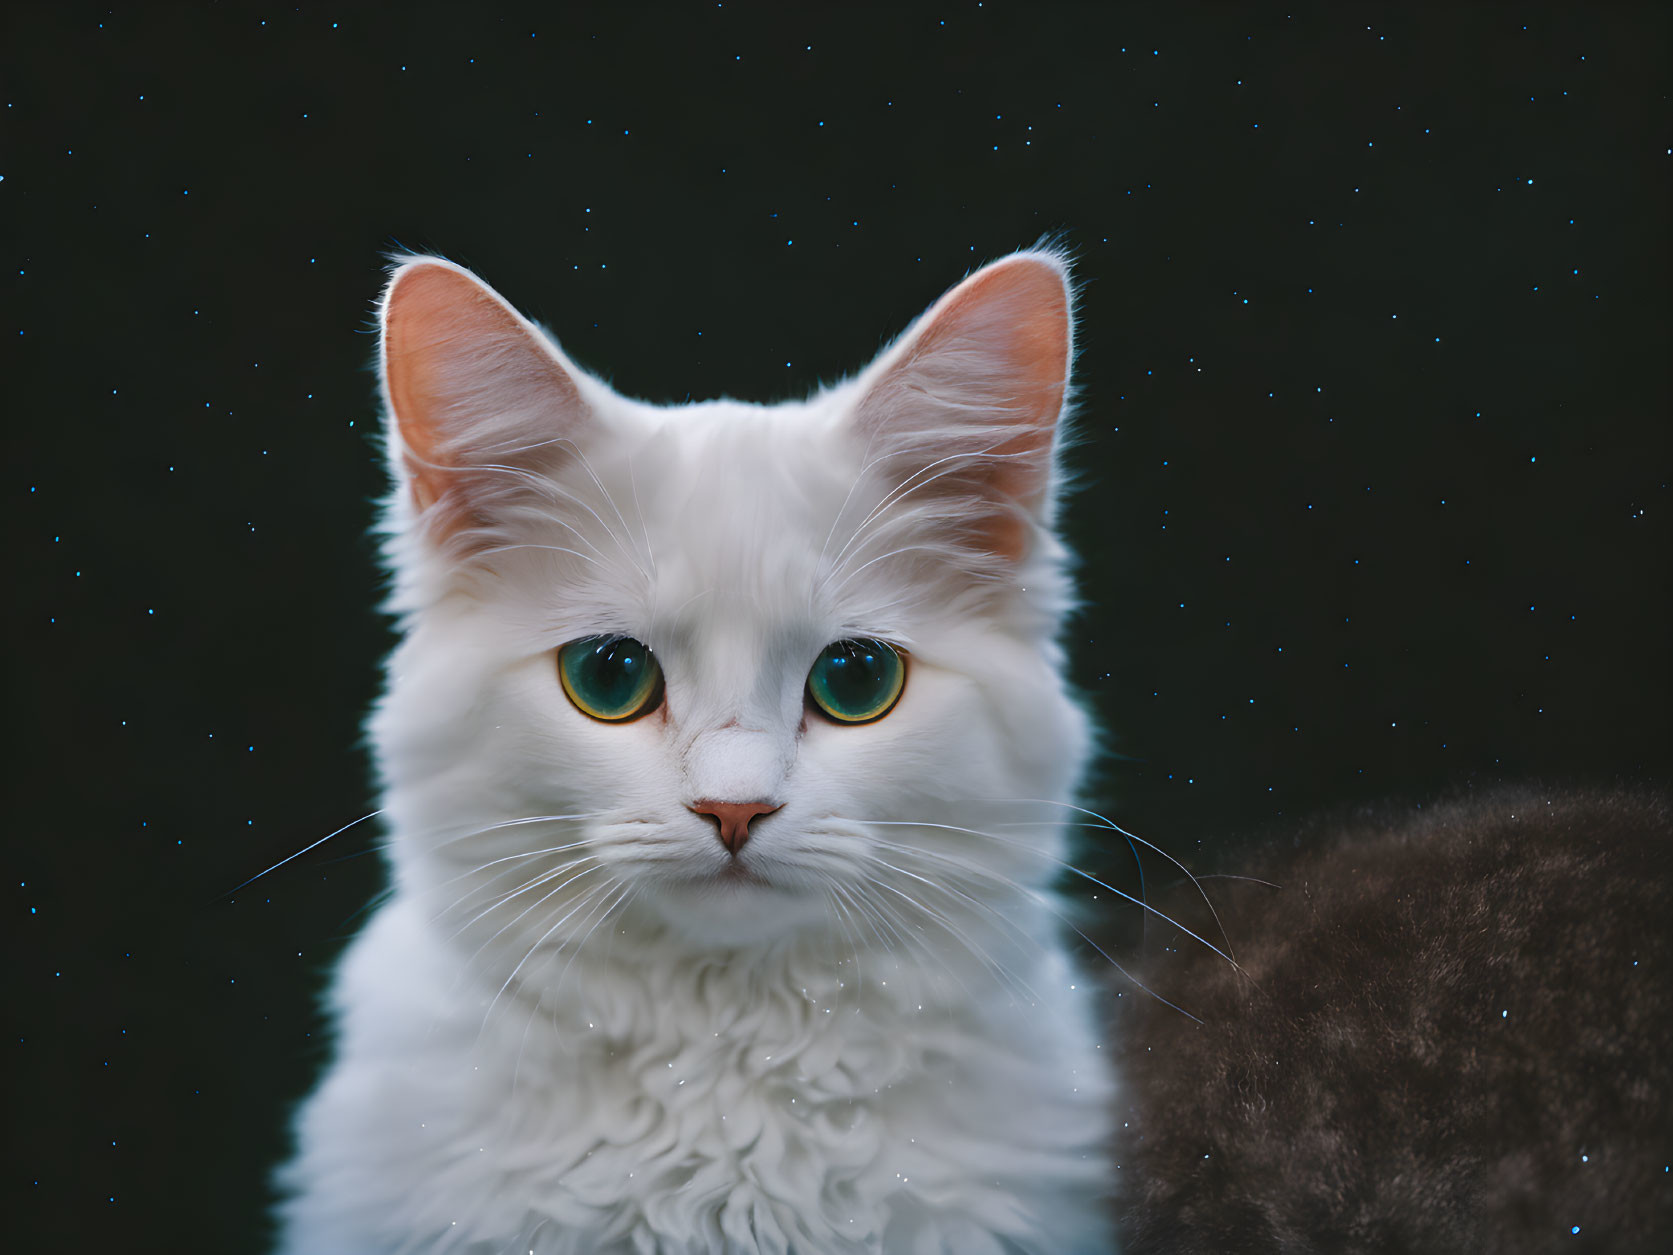 Fluffy White Cat with Green Eyes on Dark Starry Background